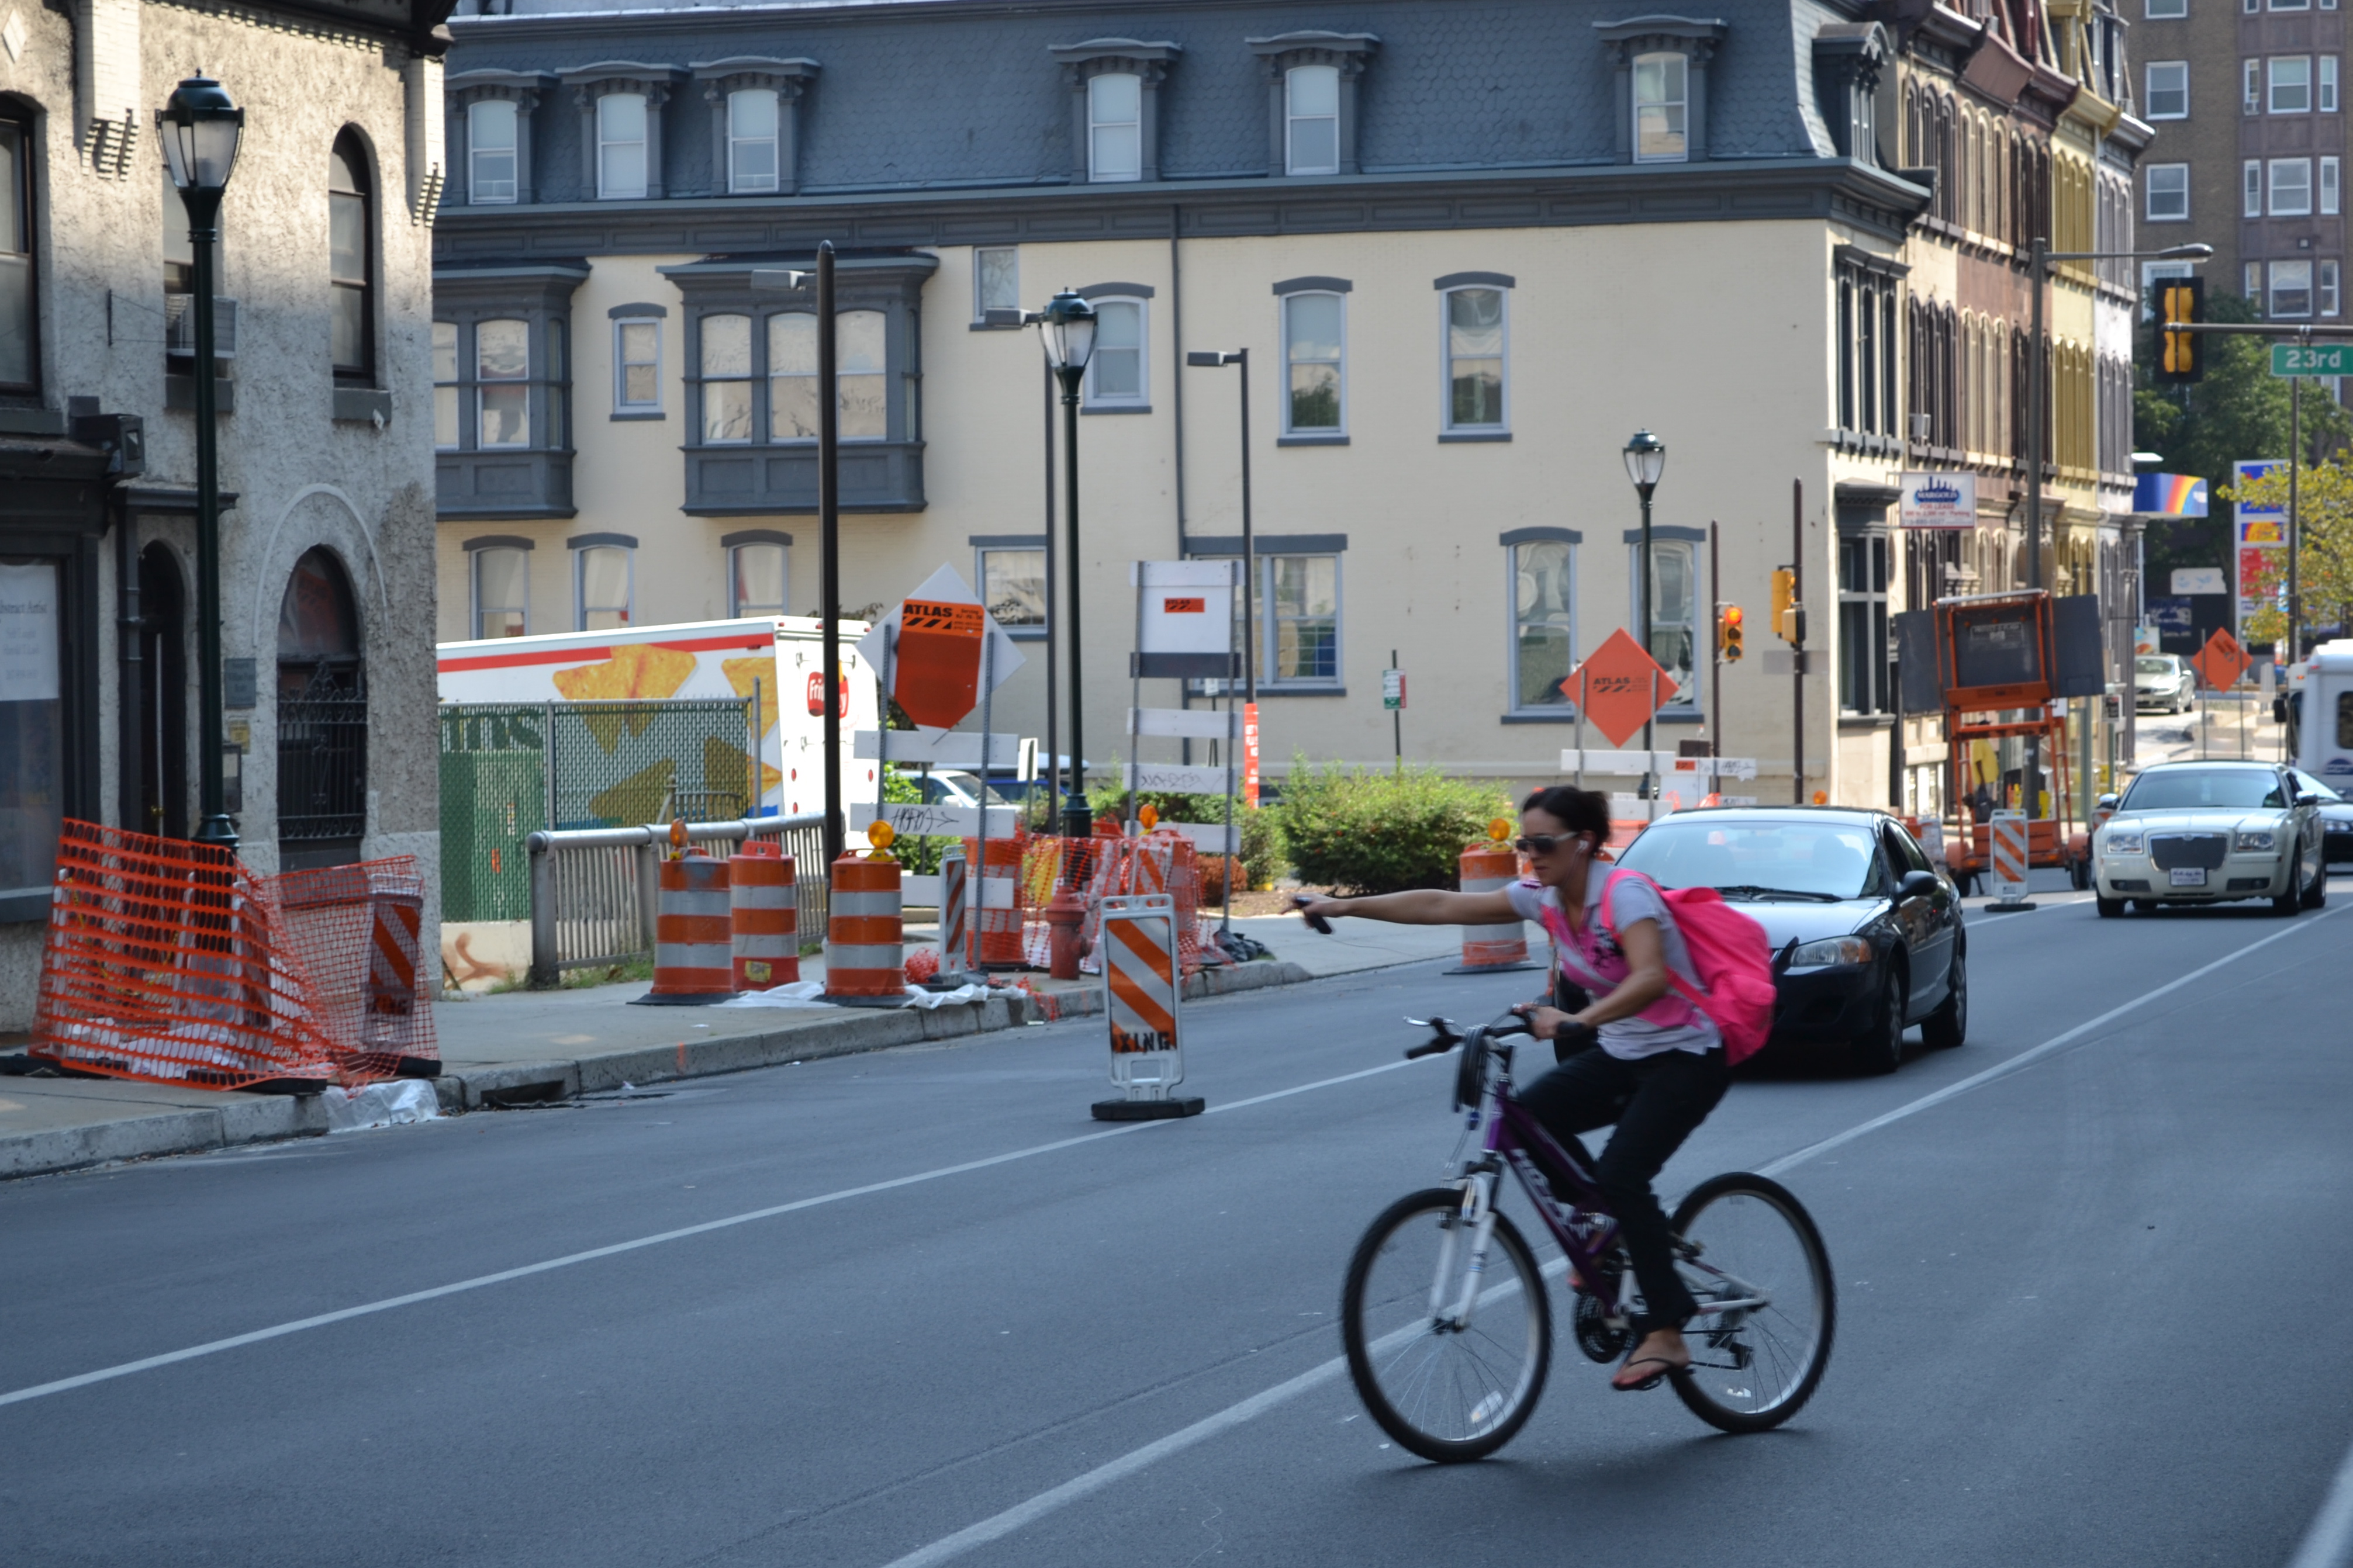 Despite detour signs, some cyclists still used the bridge during construction